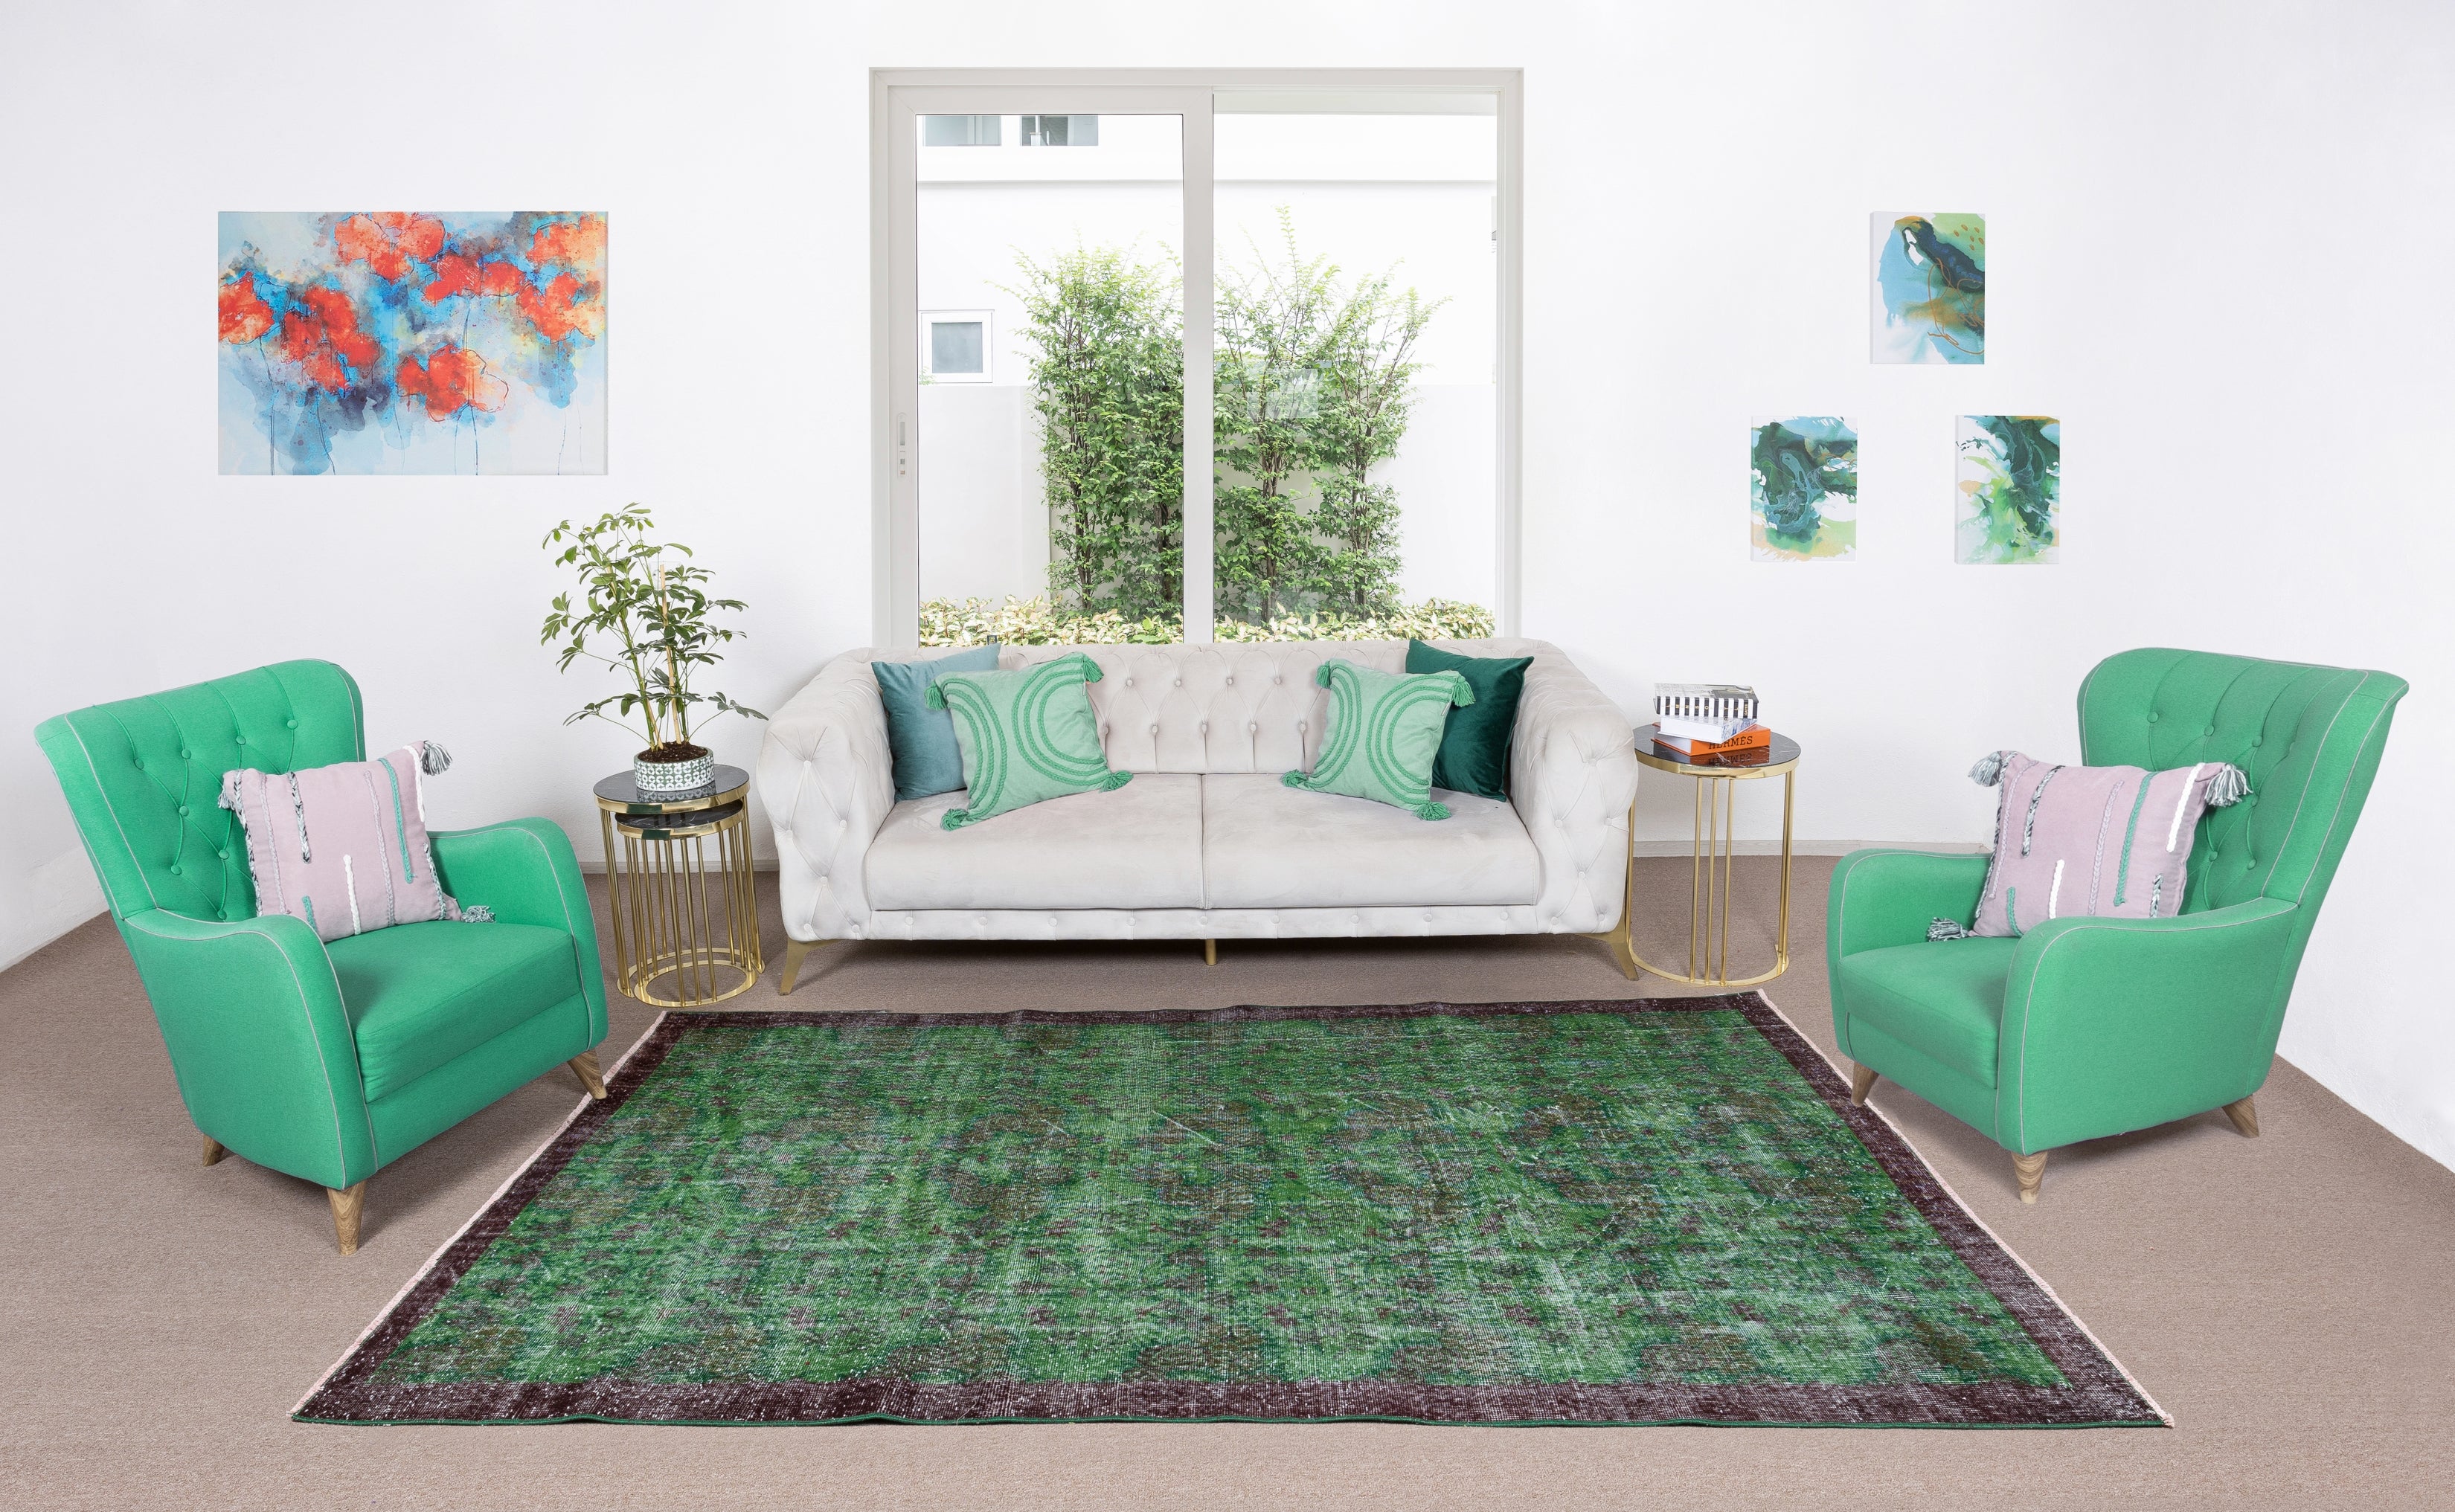 6.5x10 Ft Stylish Green Area Rug, Handmade Wool Carpet for Modern Interiors For Sale